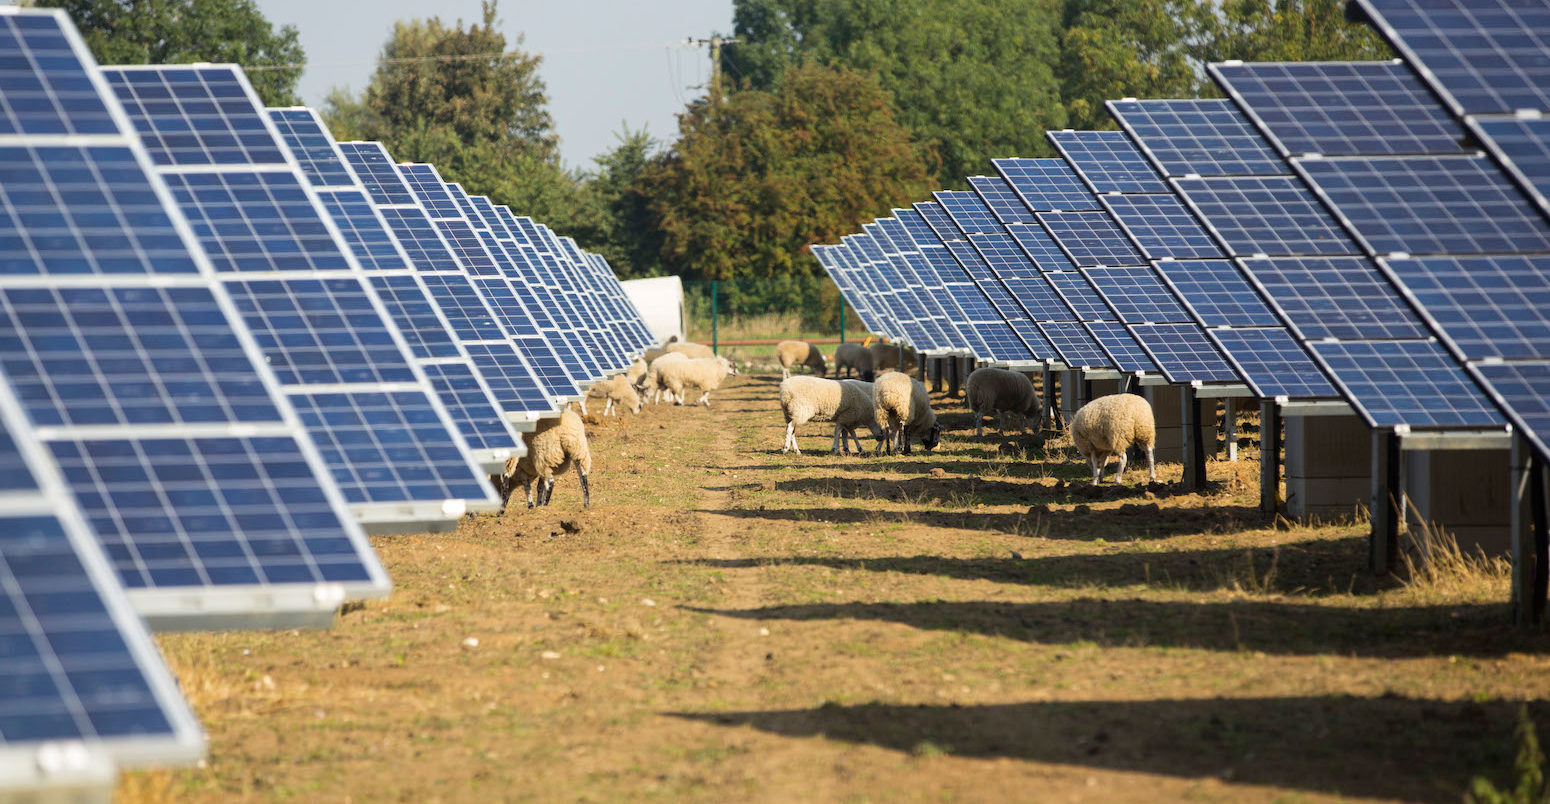 Wymeswold Solar Farm, the largest solar farm in the UK at 34 MWp, is based on an old disused second world war airfield, Leicestershire, UK. Image ID: DGHCKE. Credit: Ashley Cooper / Alamy Stock Photo.